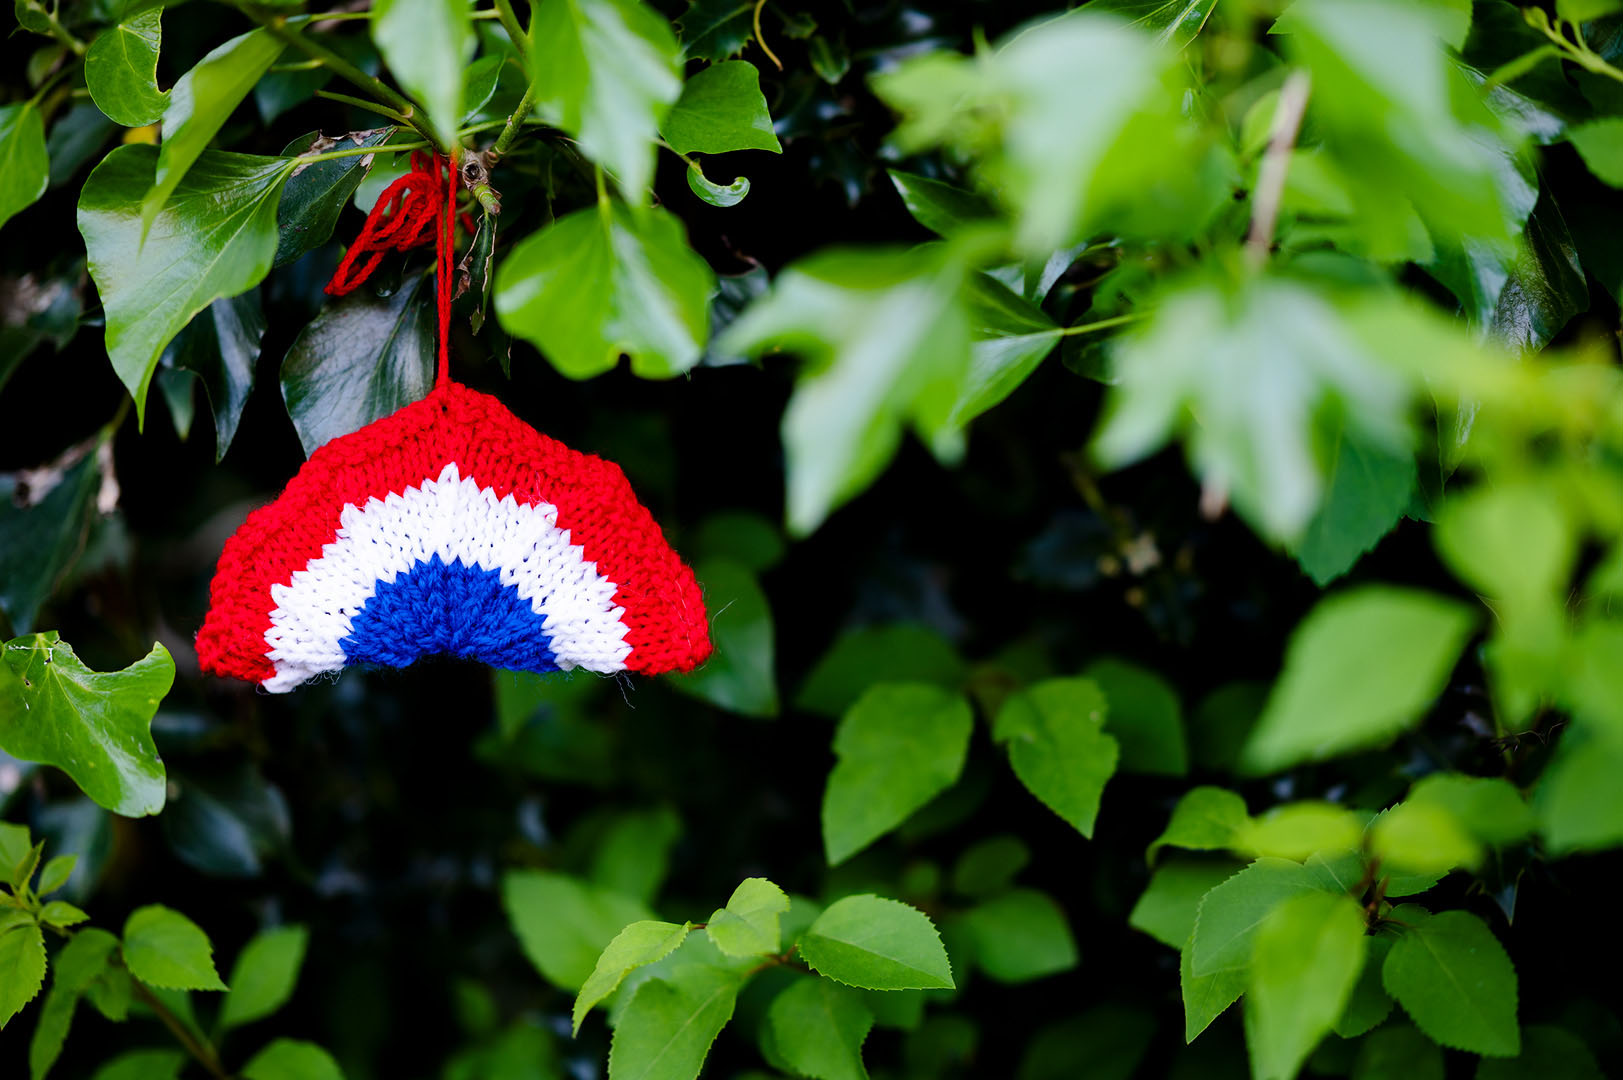 Knitted Tricolor hanging from branch during lockdown